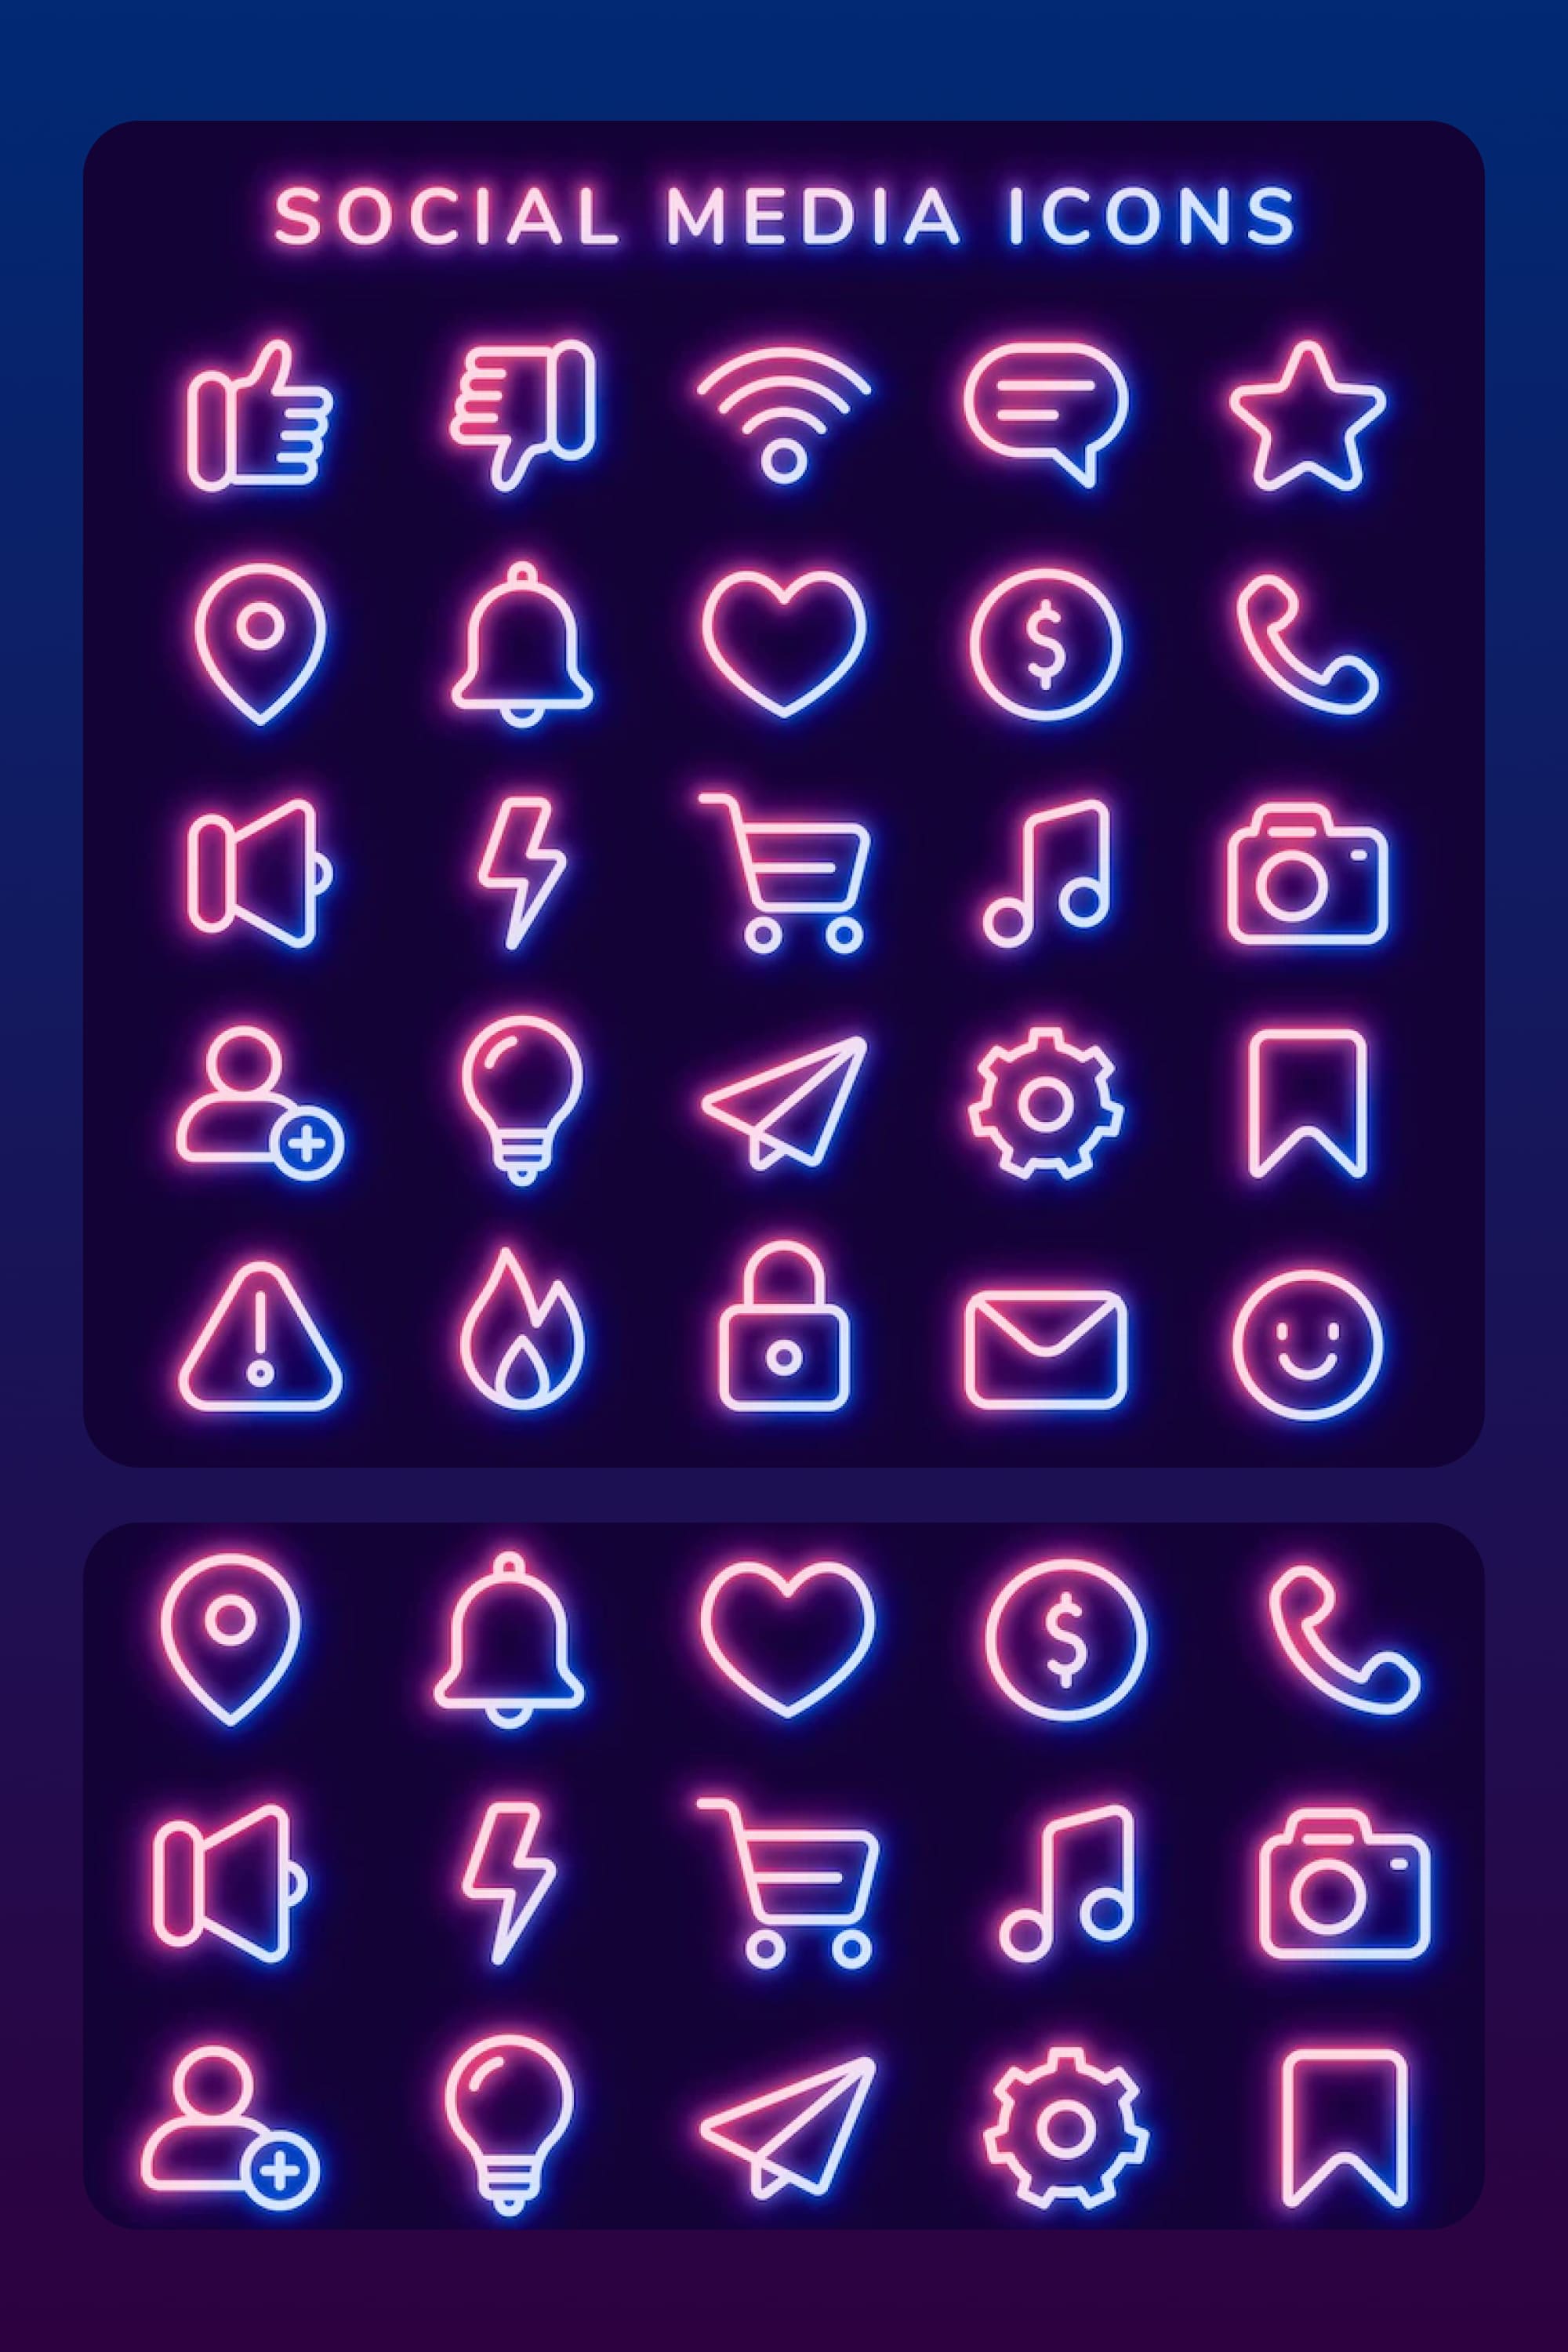 Color icons for social networks on a blue background.